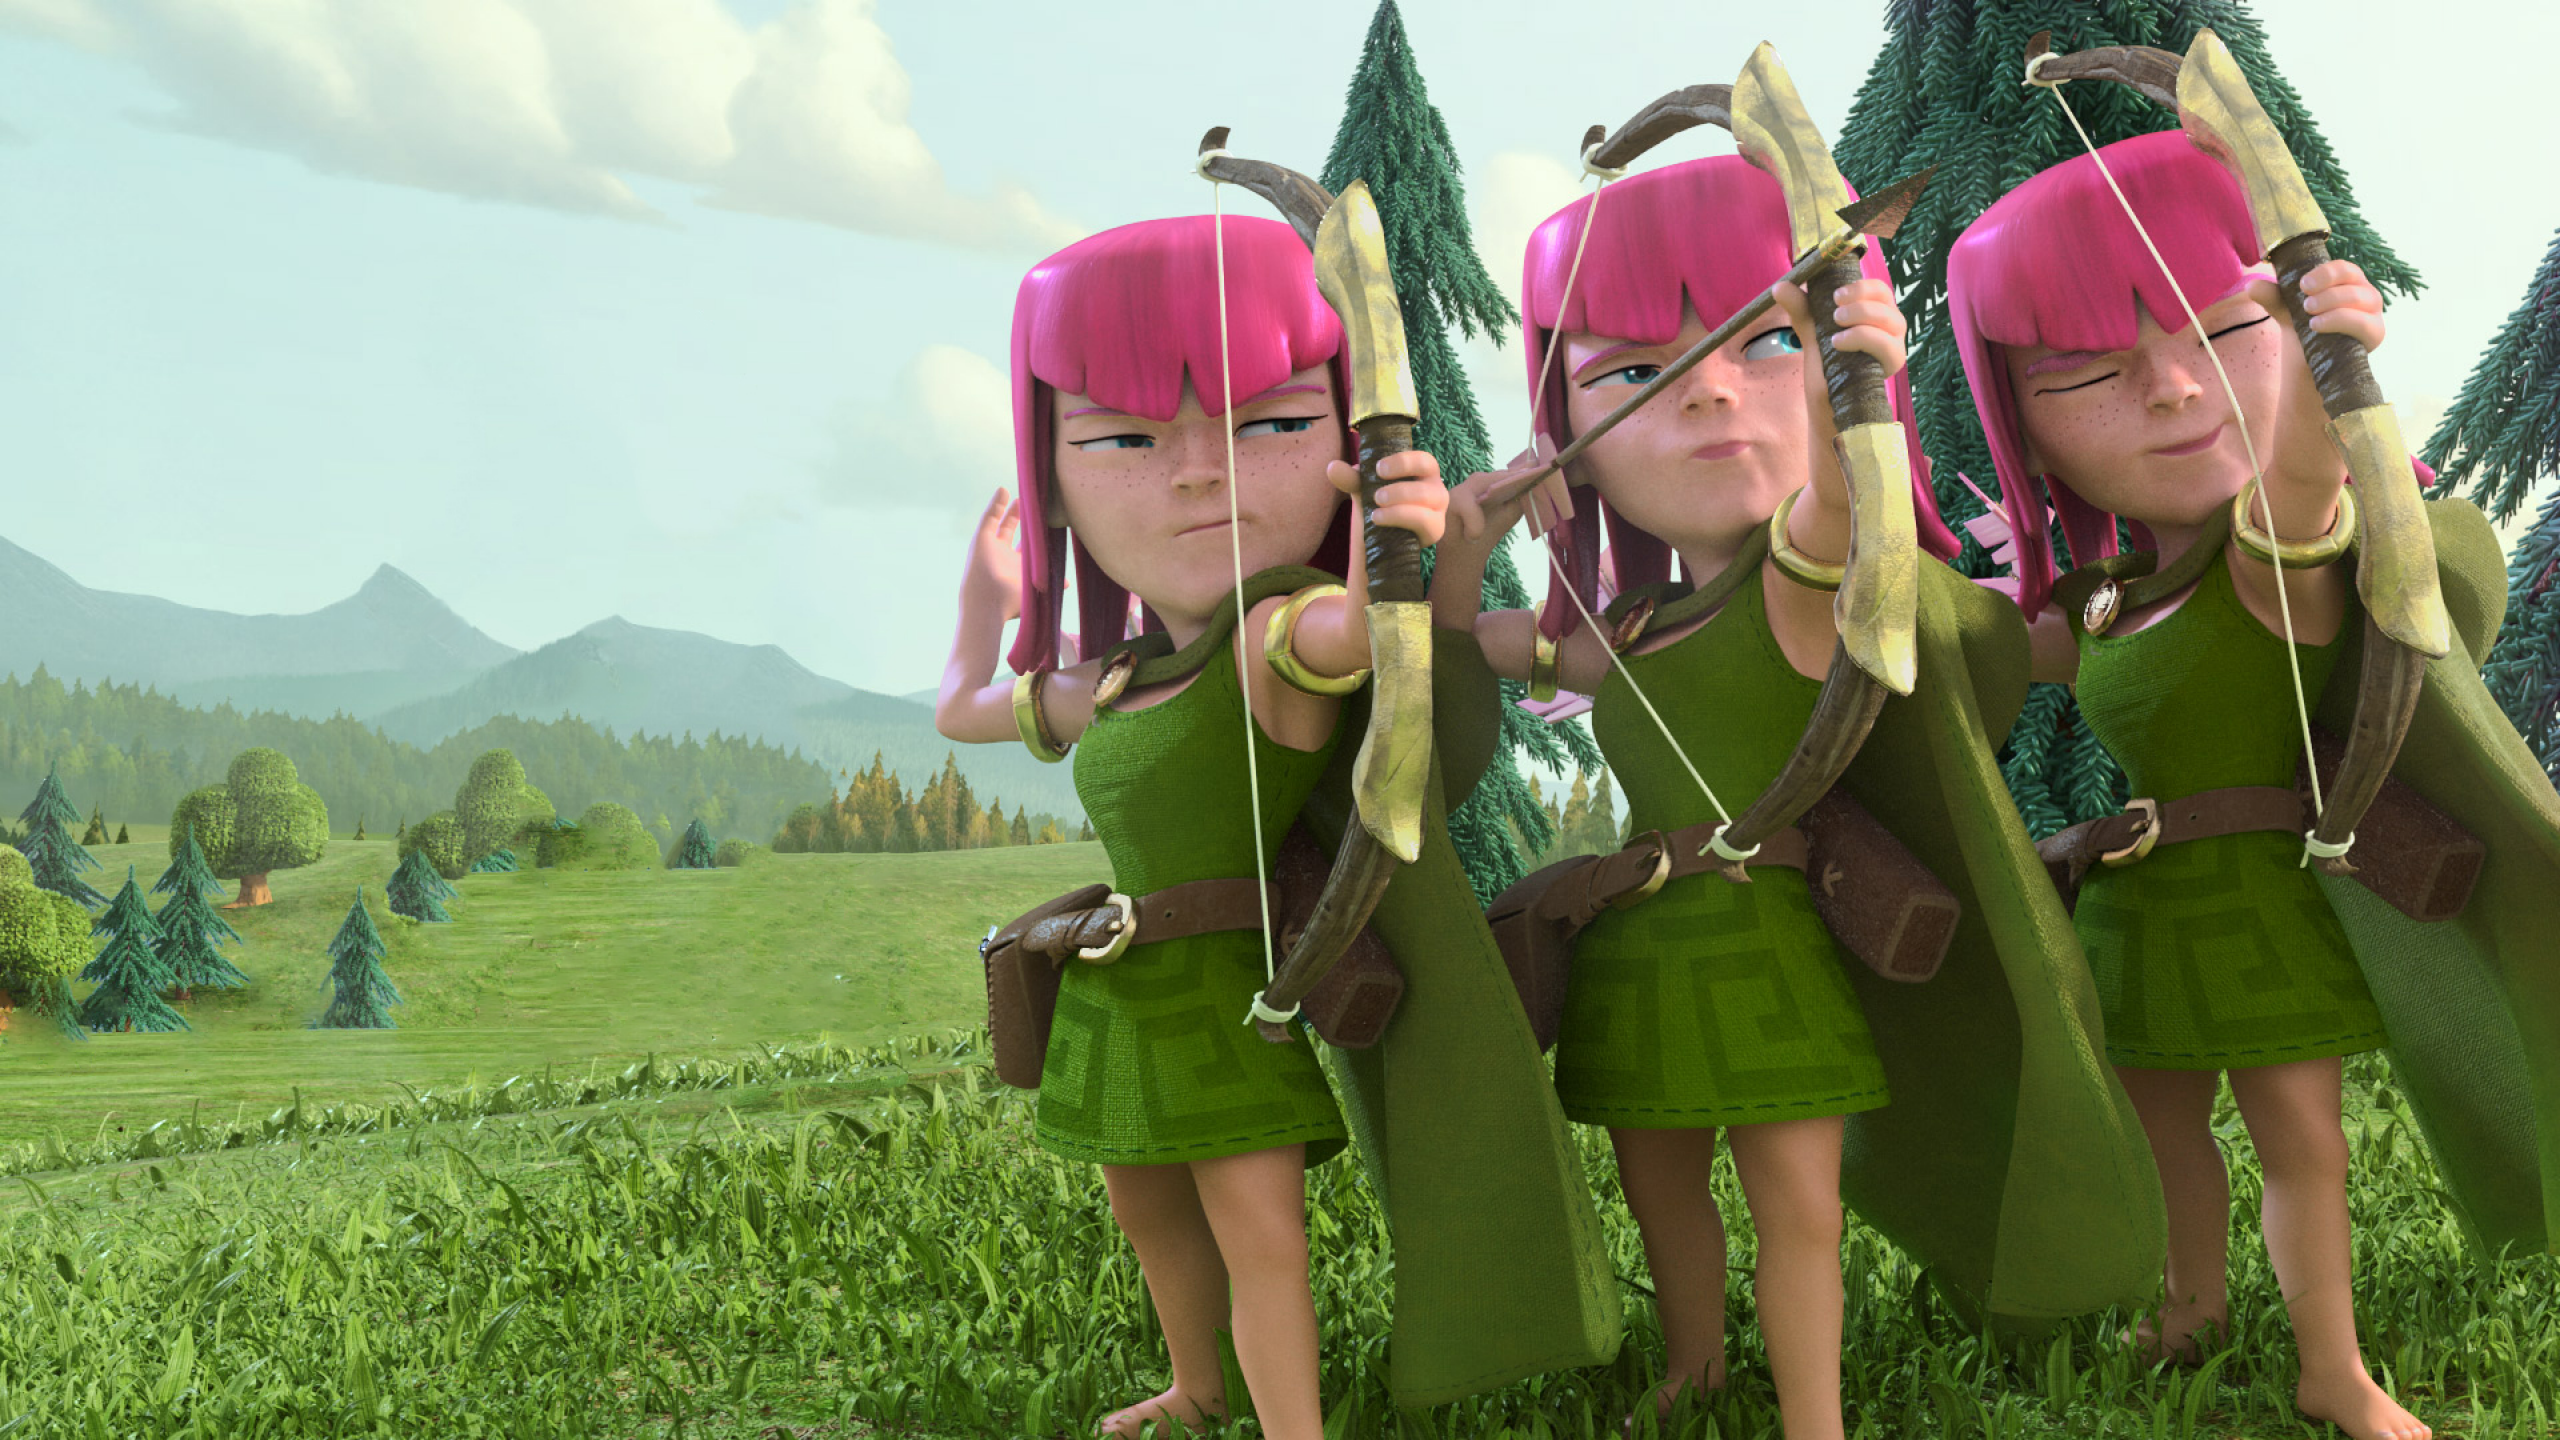 Download 2560x1440 Clash Of Clans, Animation, Archers Wallpaper for iMac 27 inch